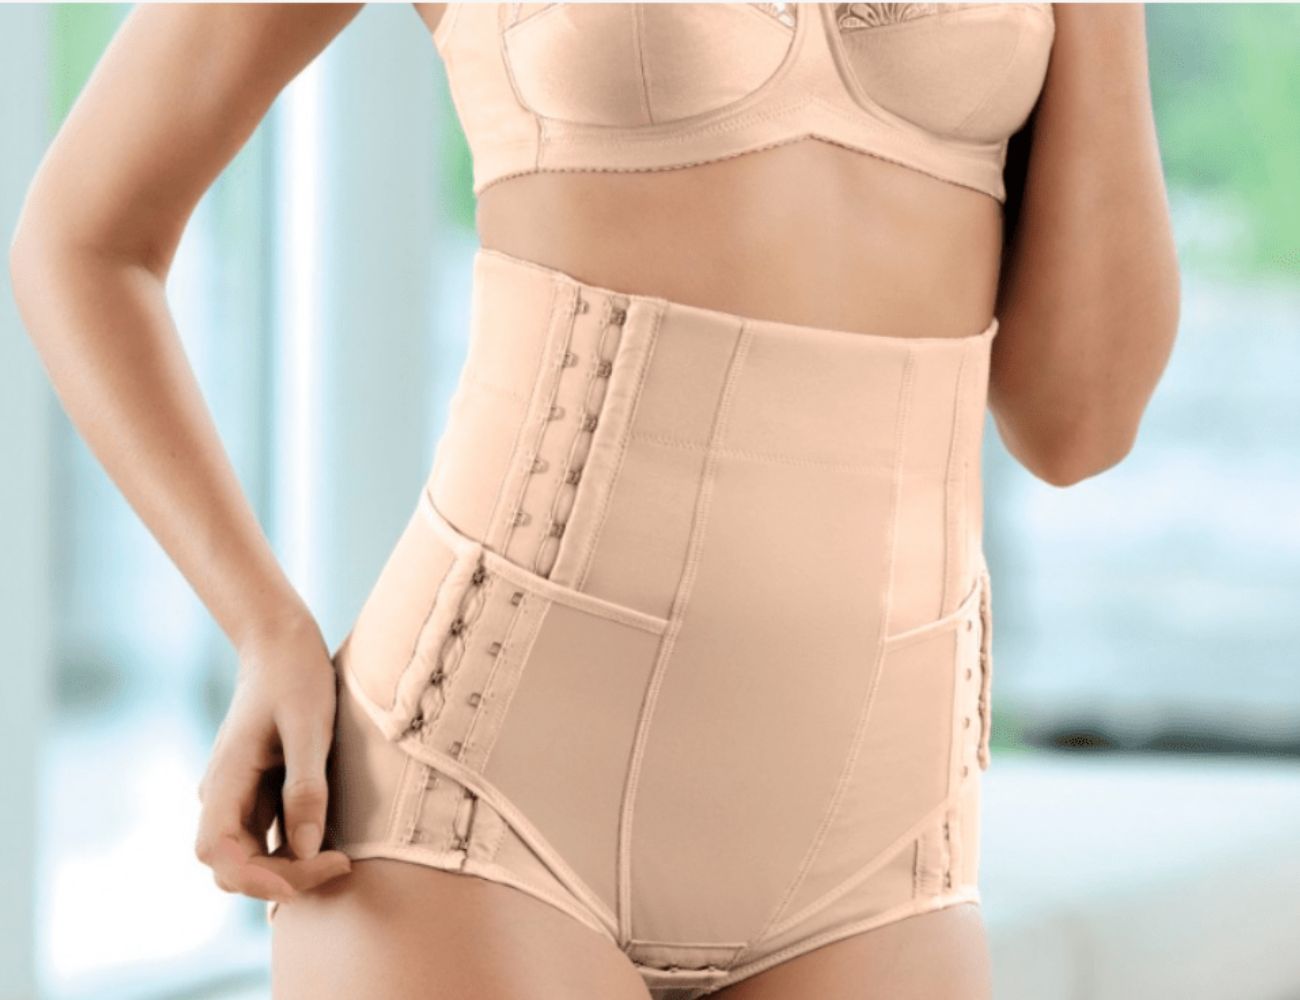 Find Cheap, Fashionable and Slimming c section girdle 